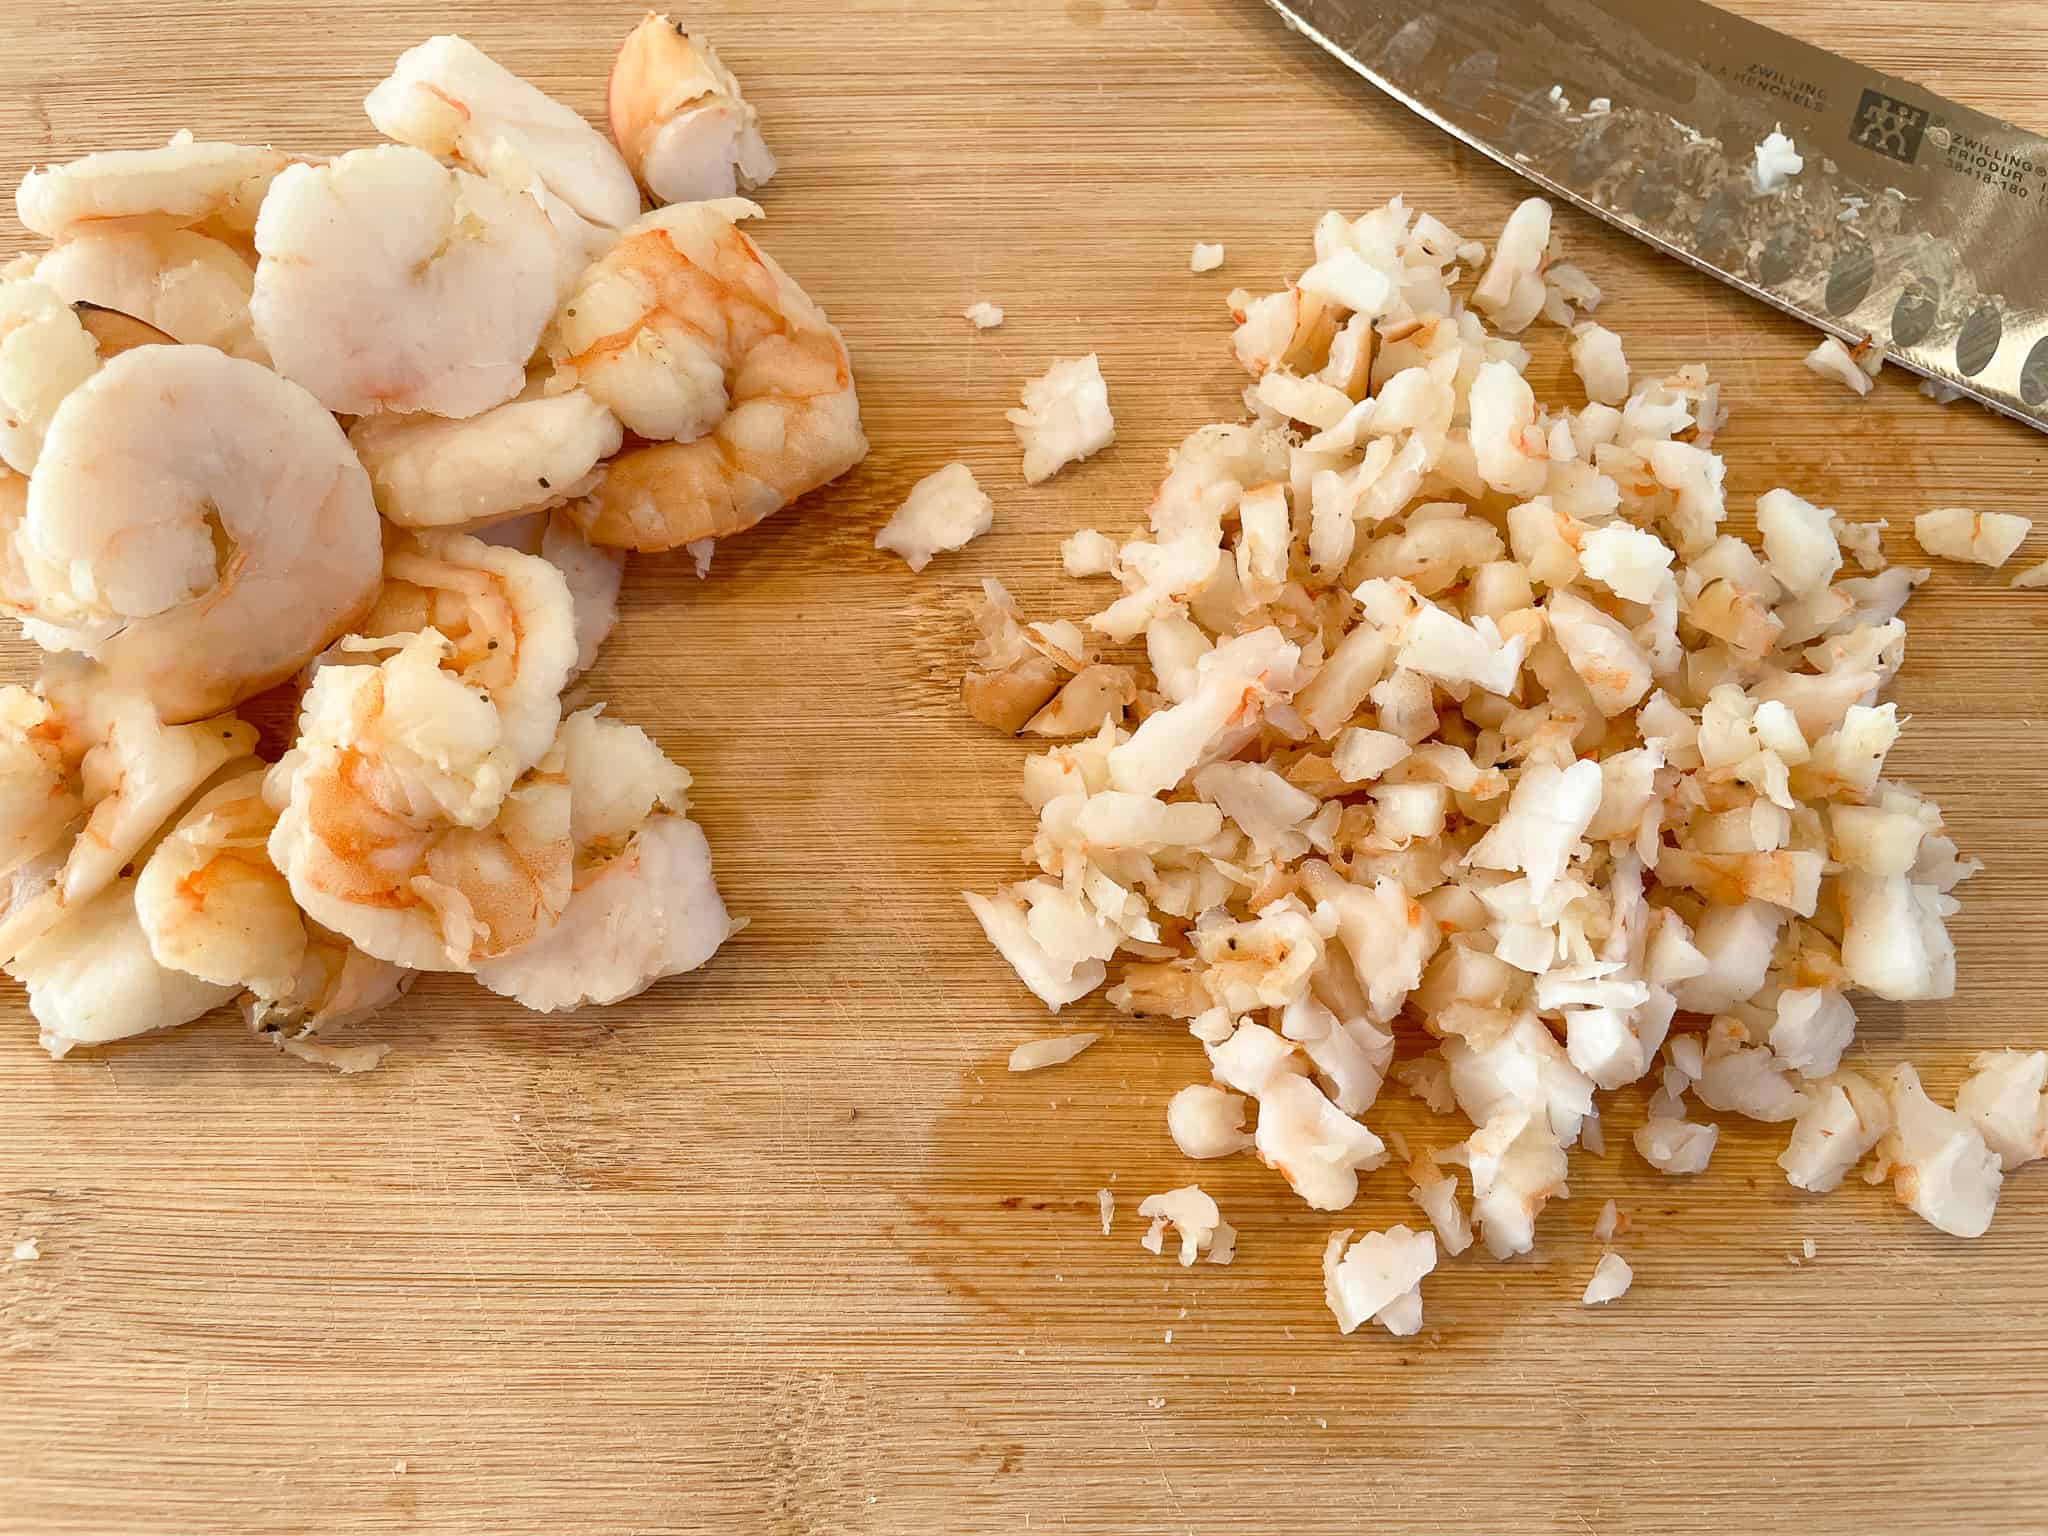 cooked shrimp being chopped into a find dice